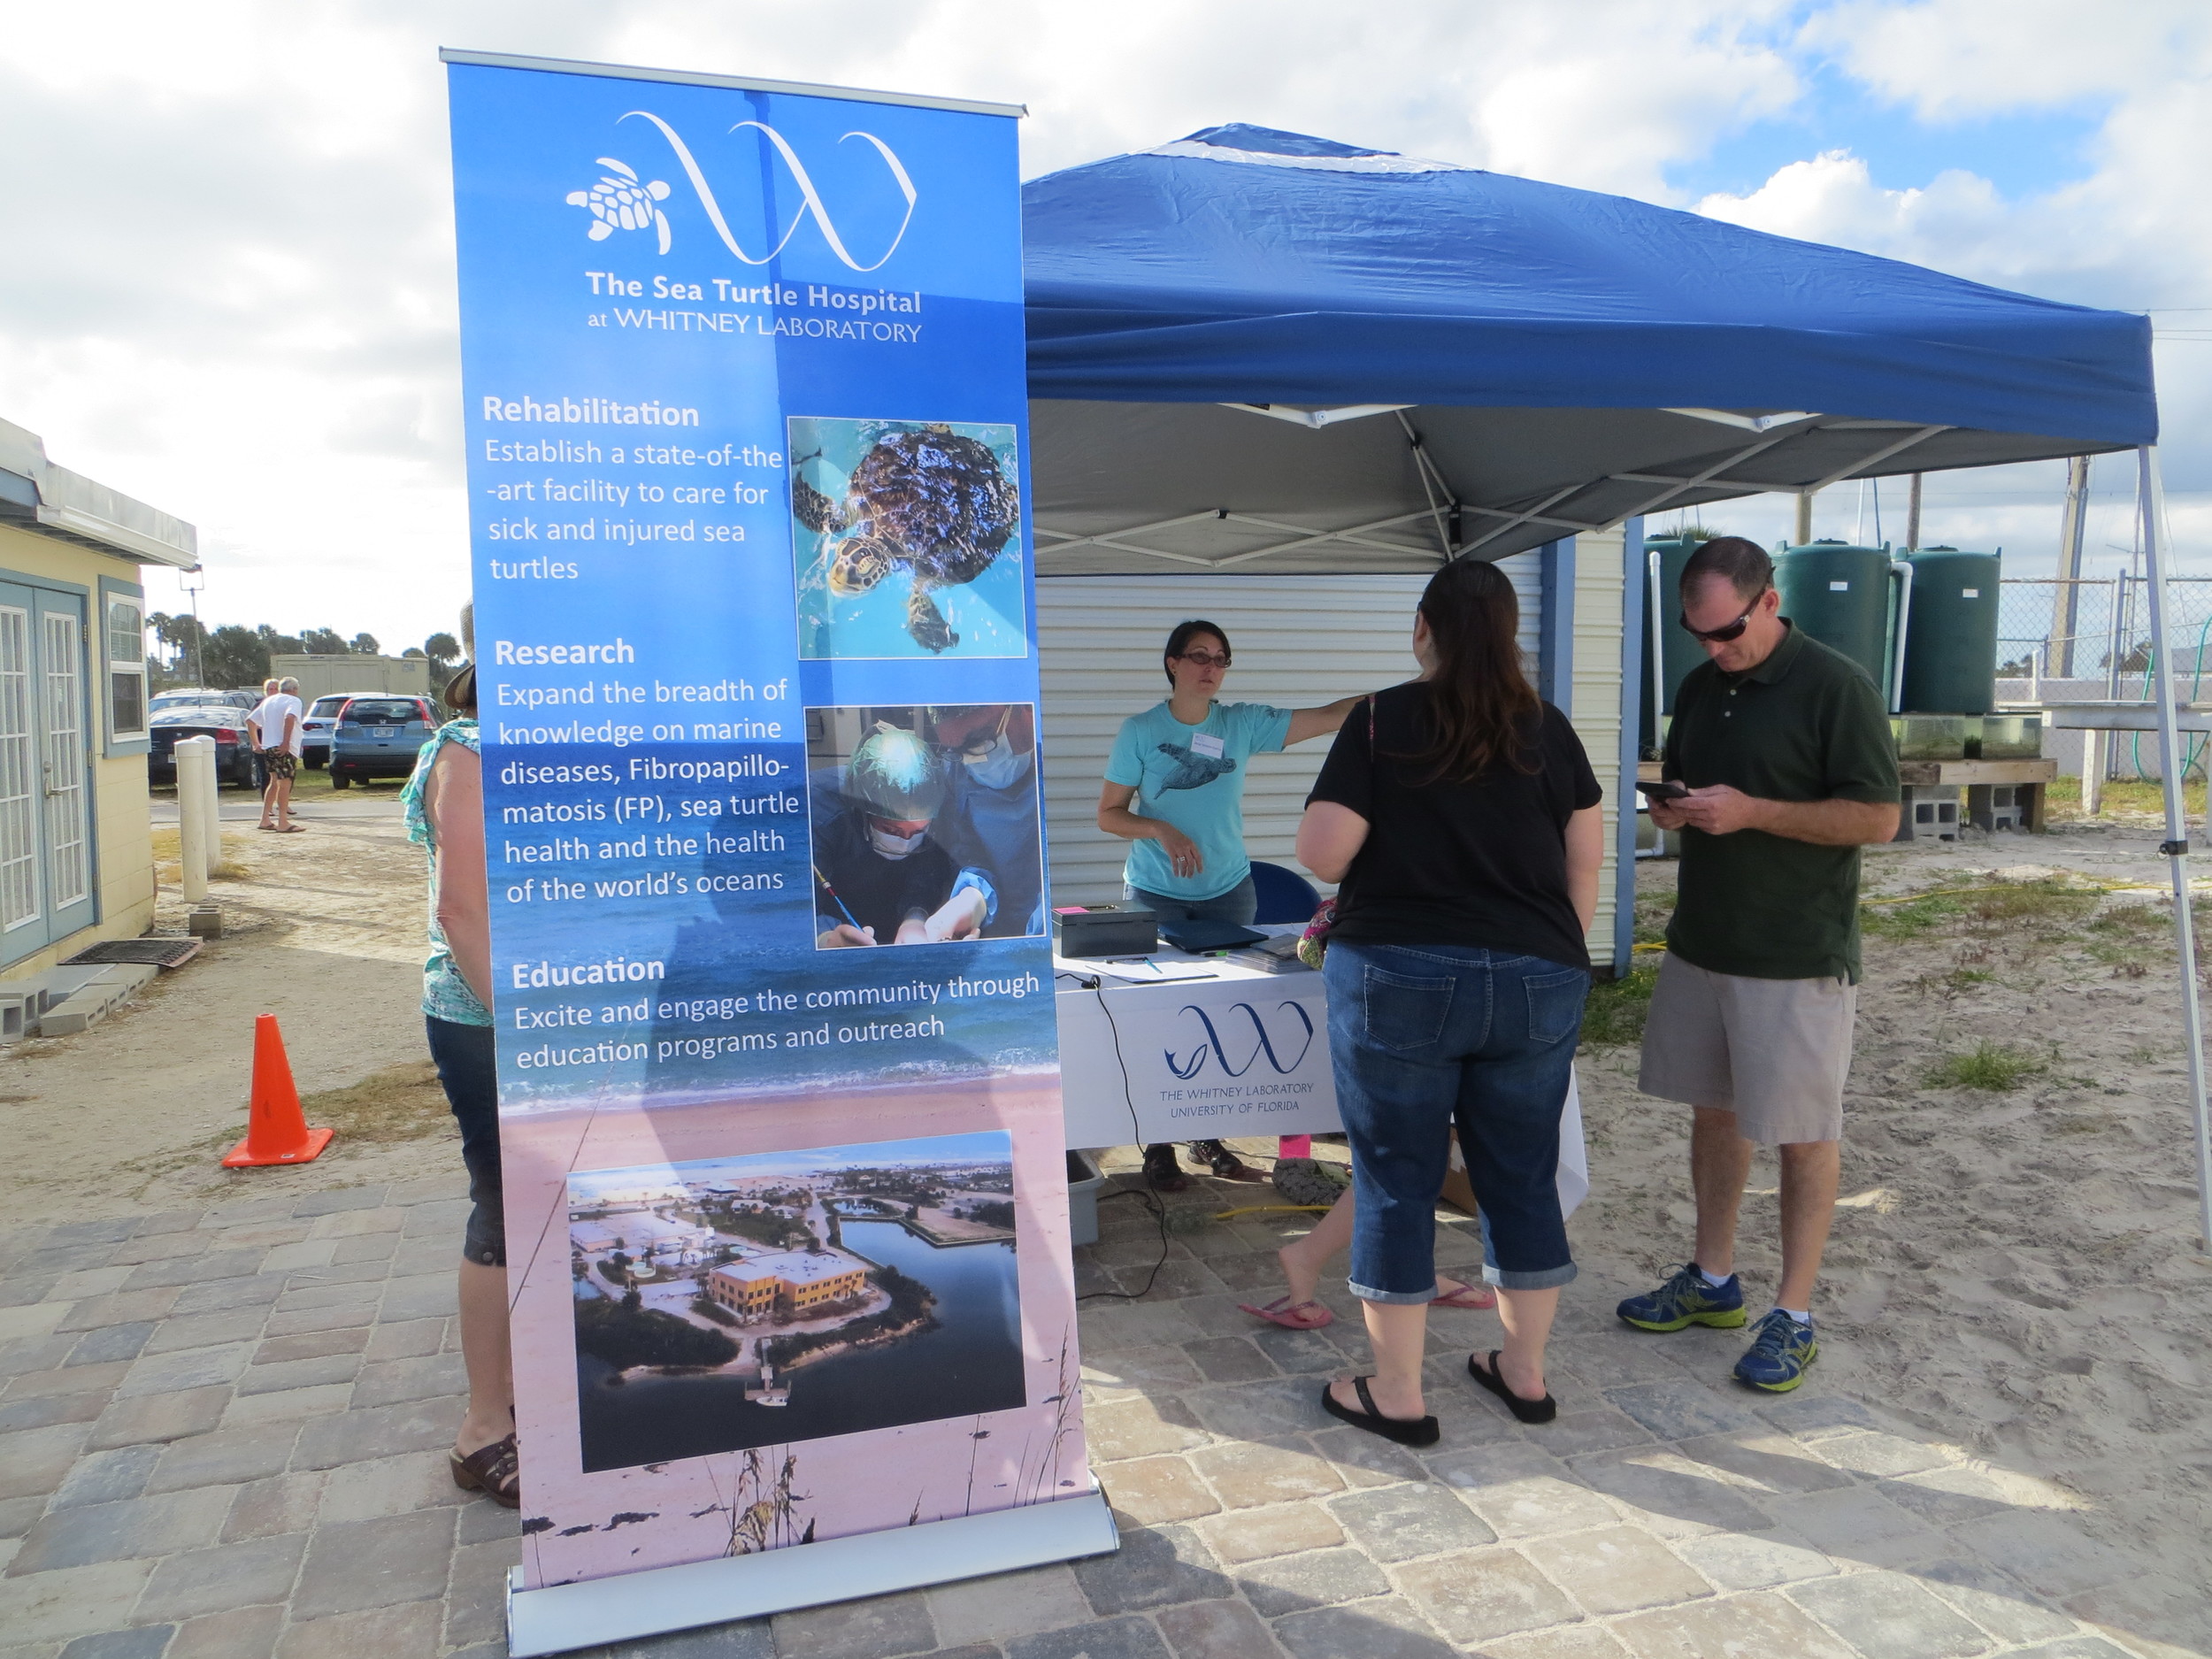 Jesse Grosso Garcia, research grants coordinator for The Whitney Laboratory, greets visitors at the check-in table. The sea turtle hospital was funded through private donors and a State License Plate Grant from the Sea Turtle Conservancy.